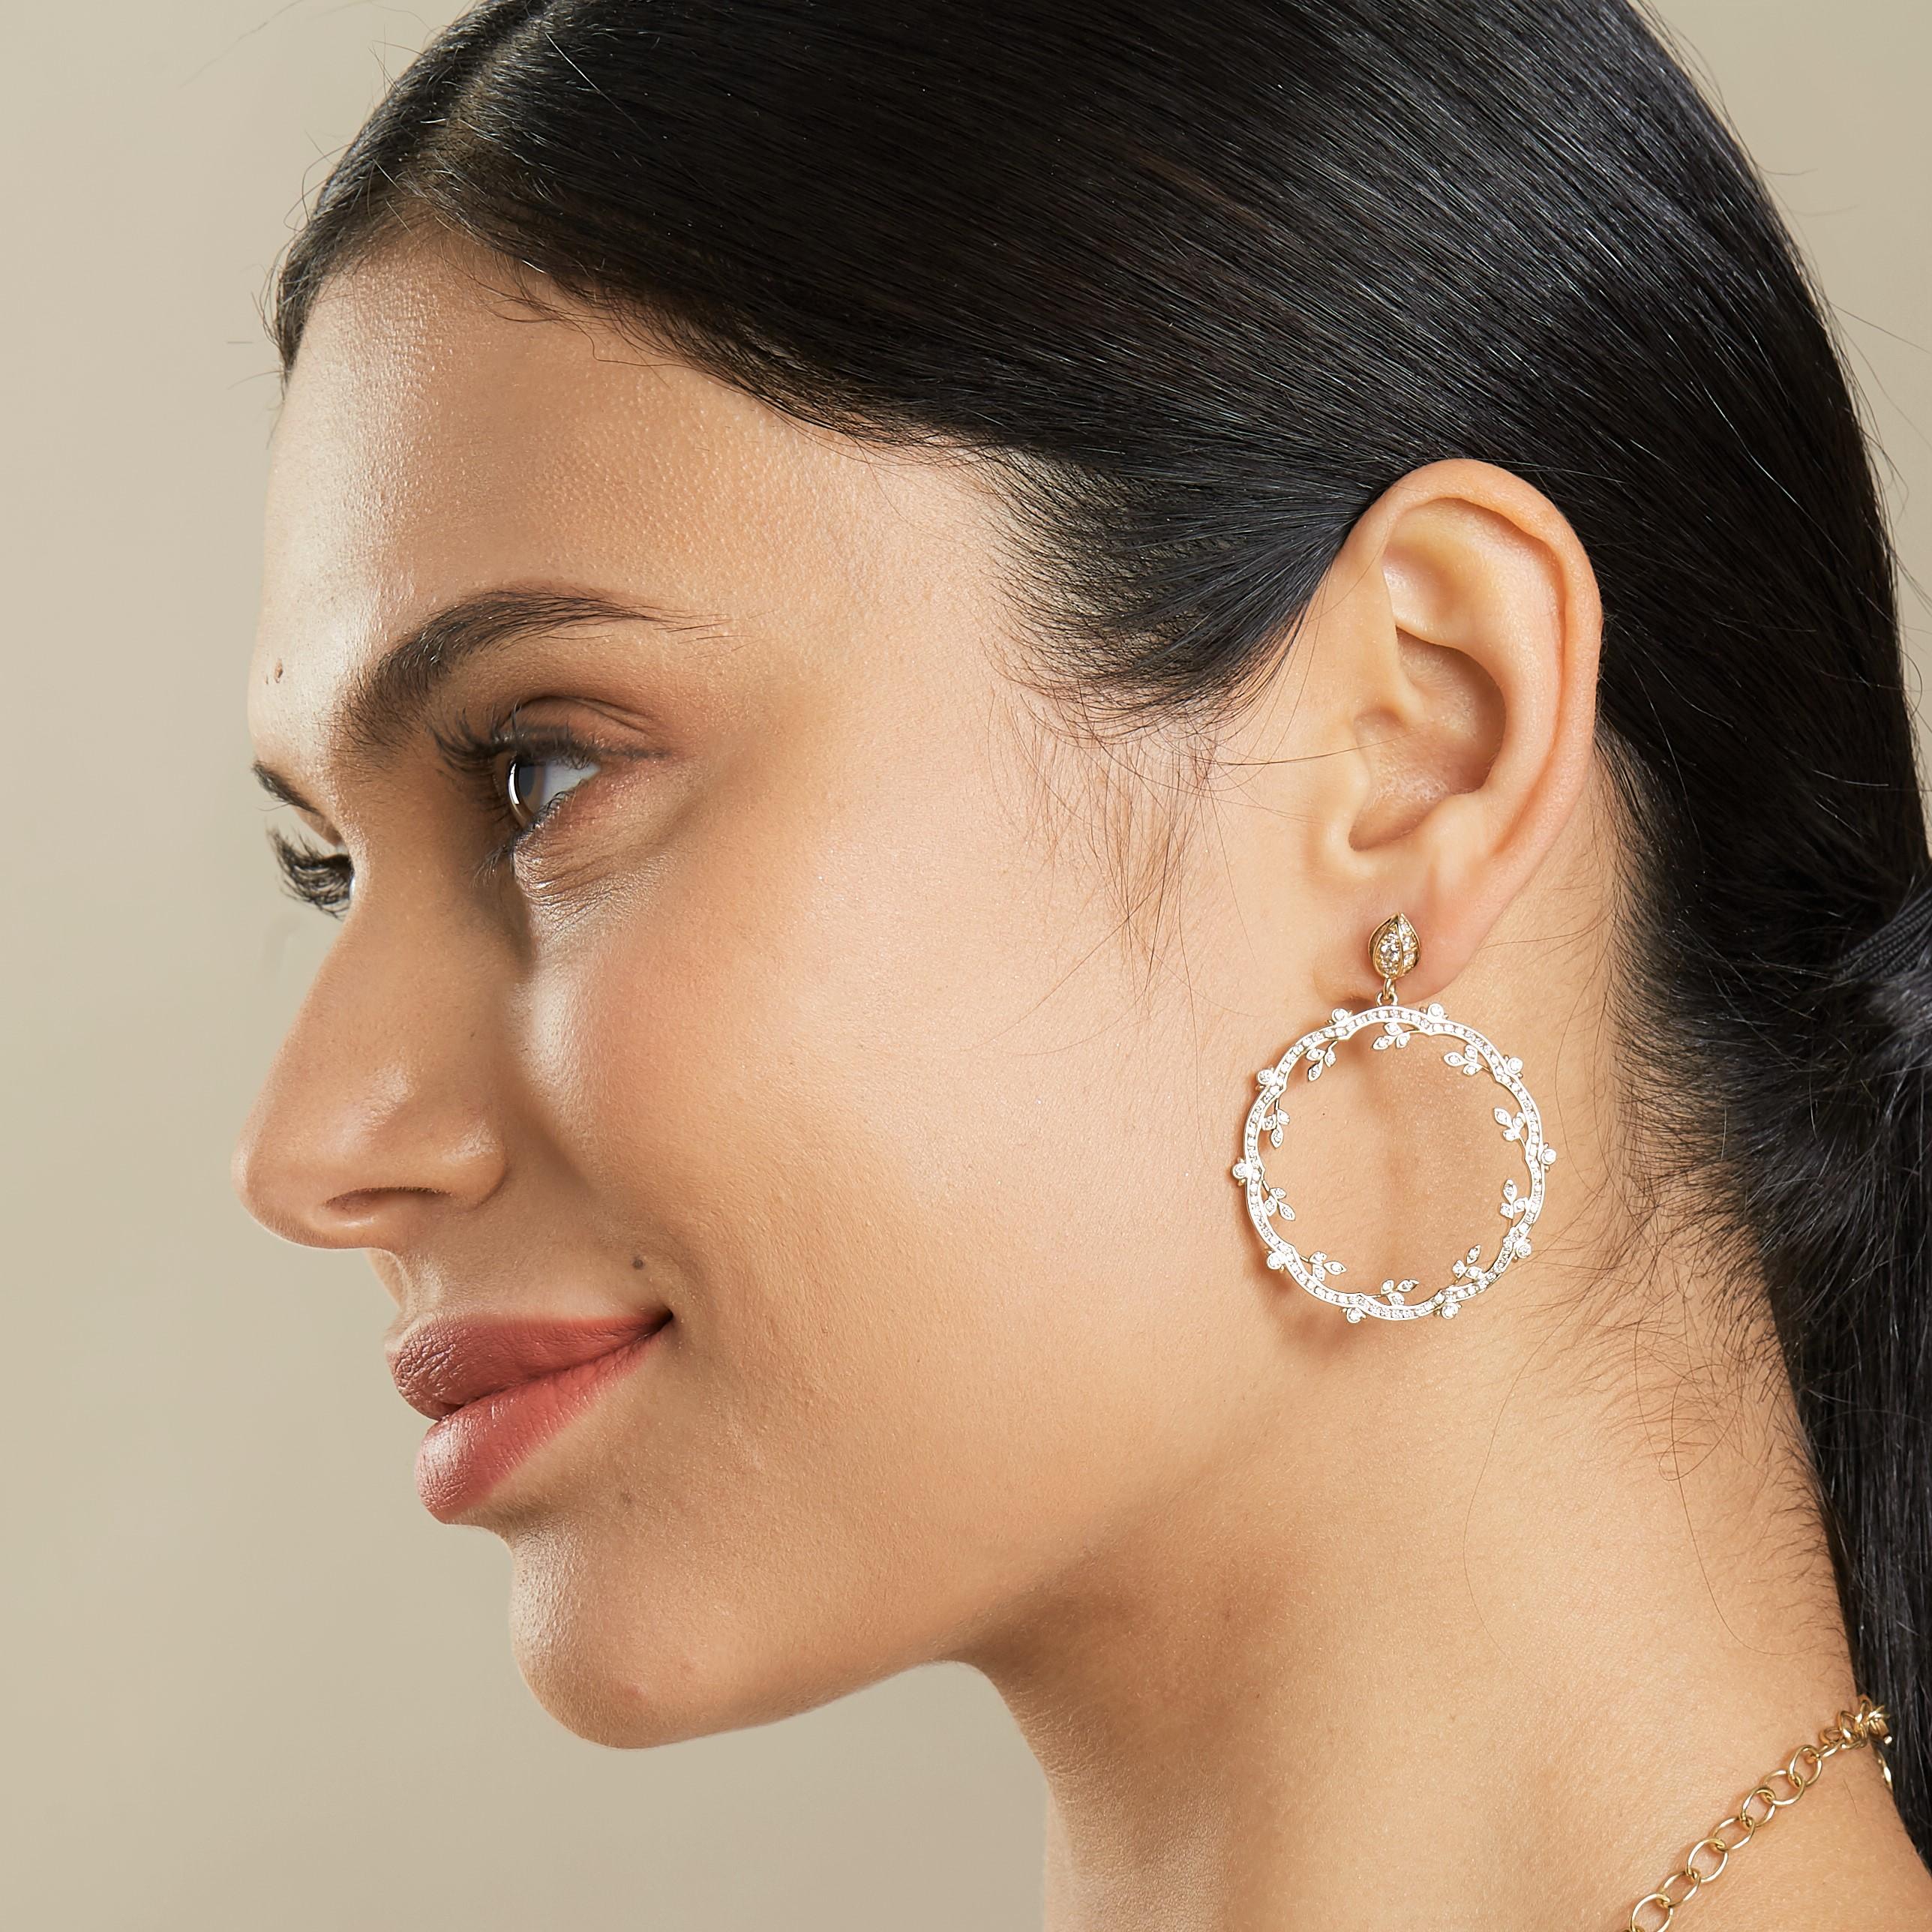 Created in 18kyg 
Diamonds 1.80 cts appro

These exquisite Diamond Earrings are sure to take your breath away. Crafted with elegant 18kyg, they feature a stunning 1.80 ct. of shimmering diamonds that will stand out in any light. These unique